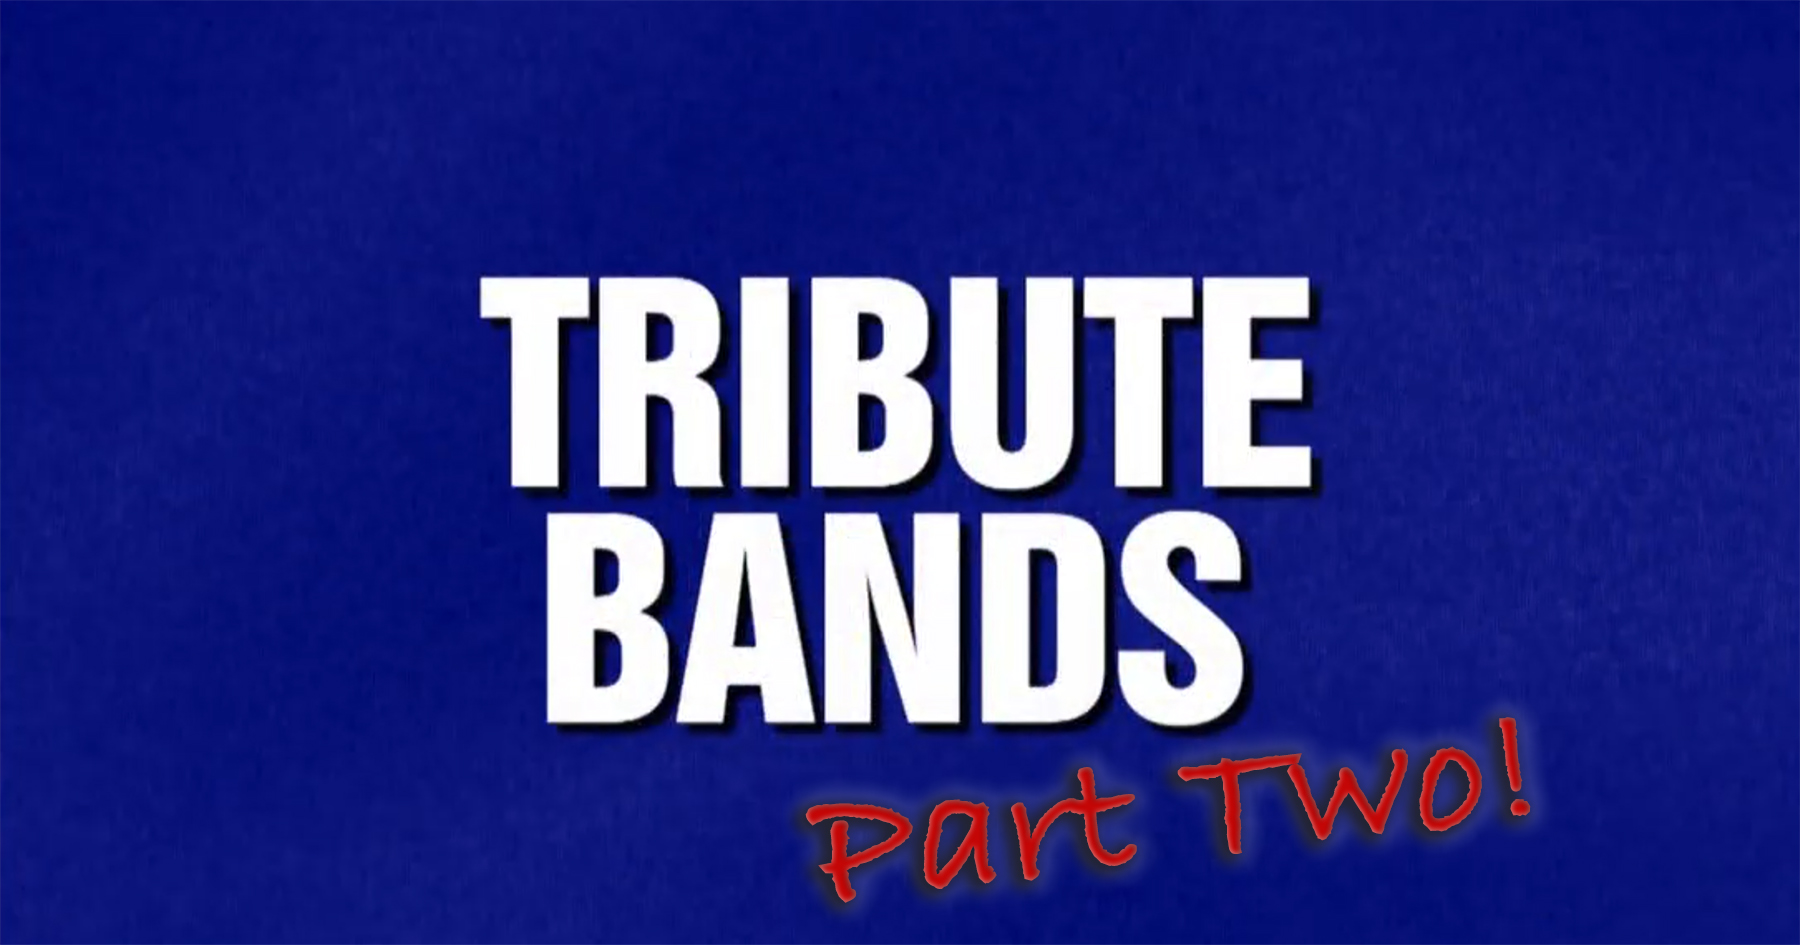 Jeopardy!™ Gives Tribute Bands Massive Exposure…Again!